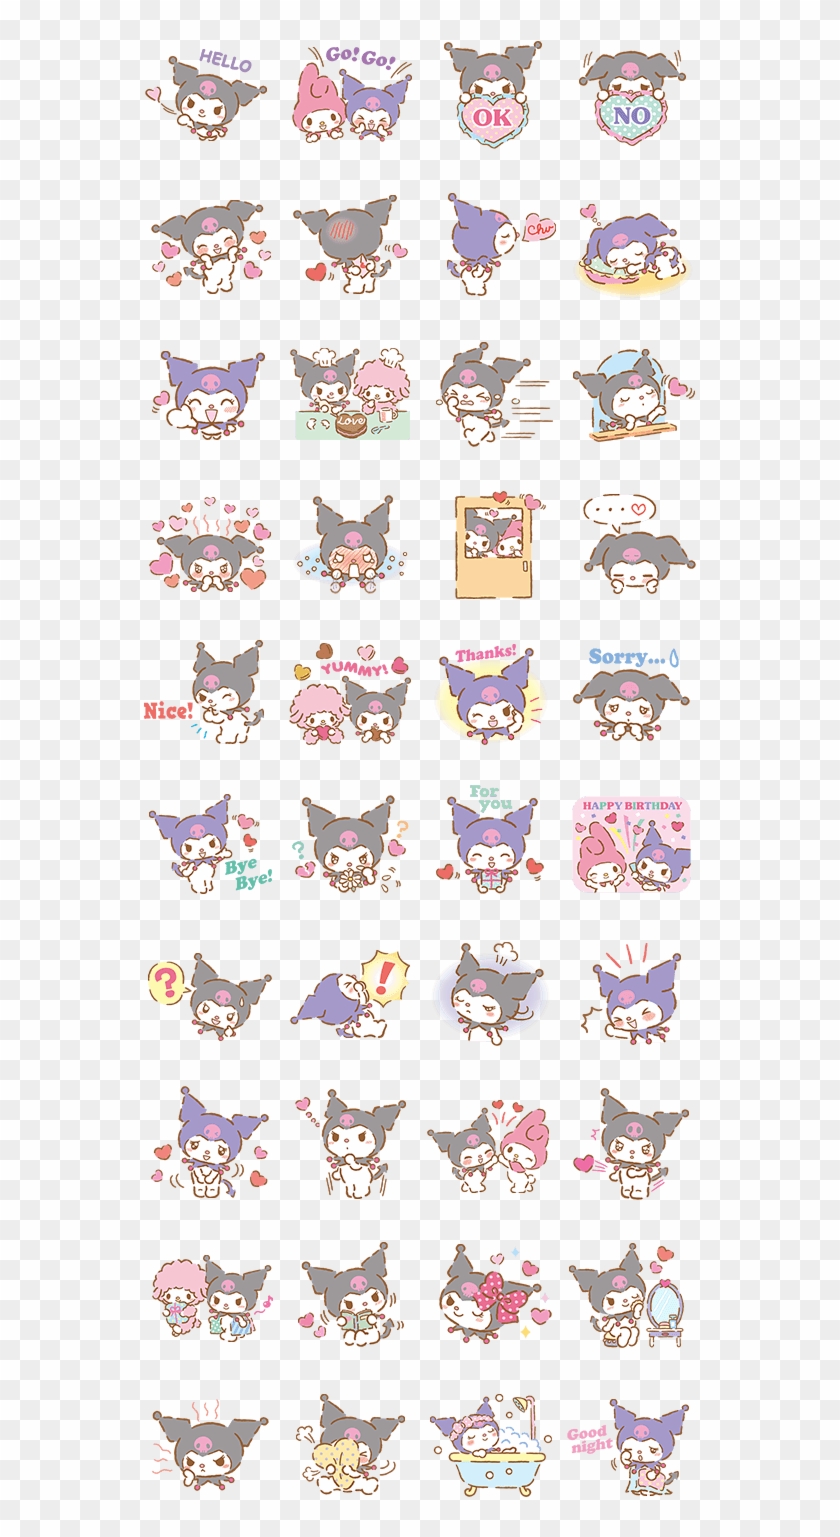 Unnamed File - We Love Kuromi Stickers Line Clipart